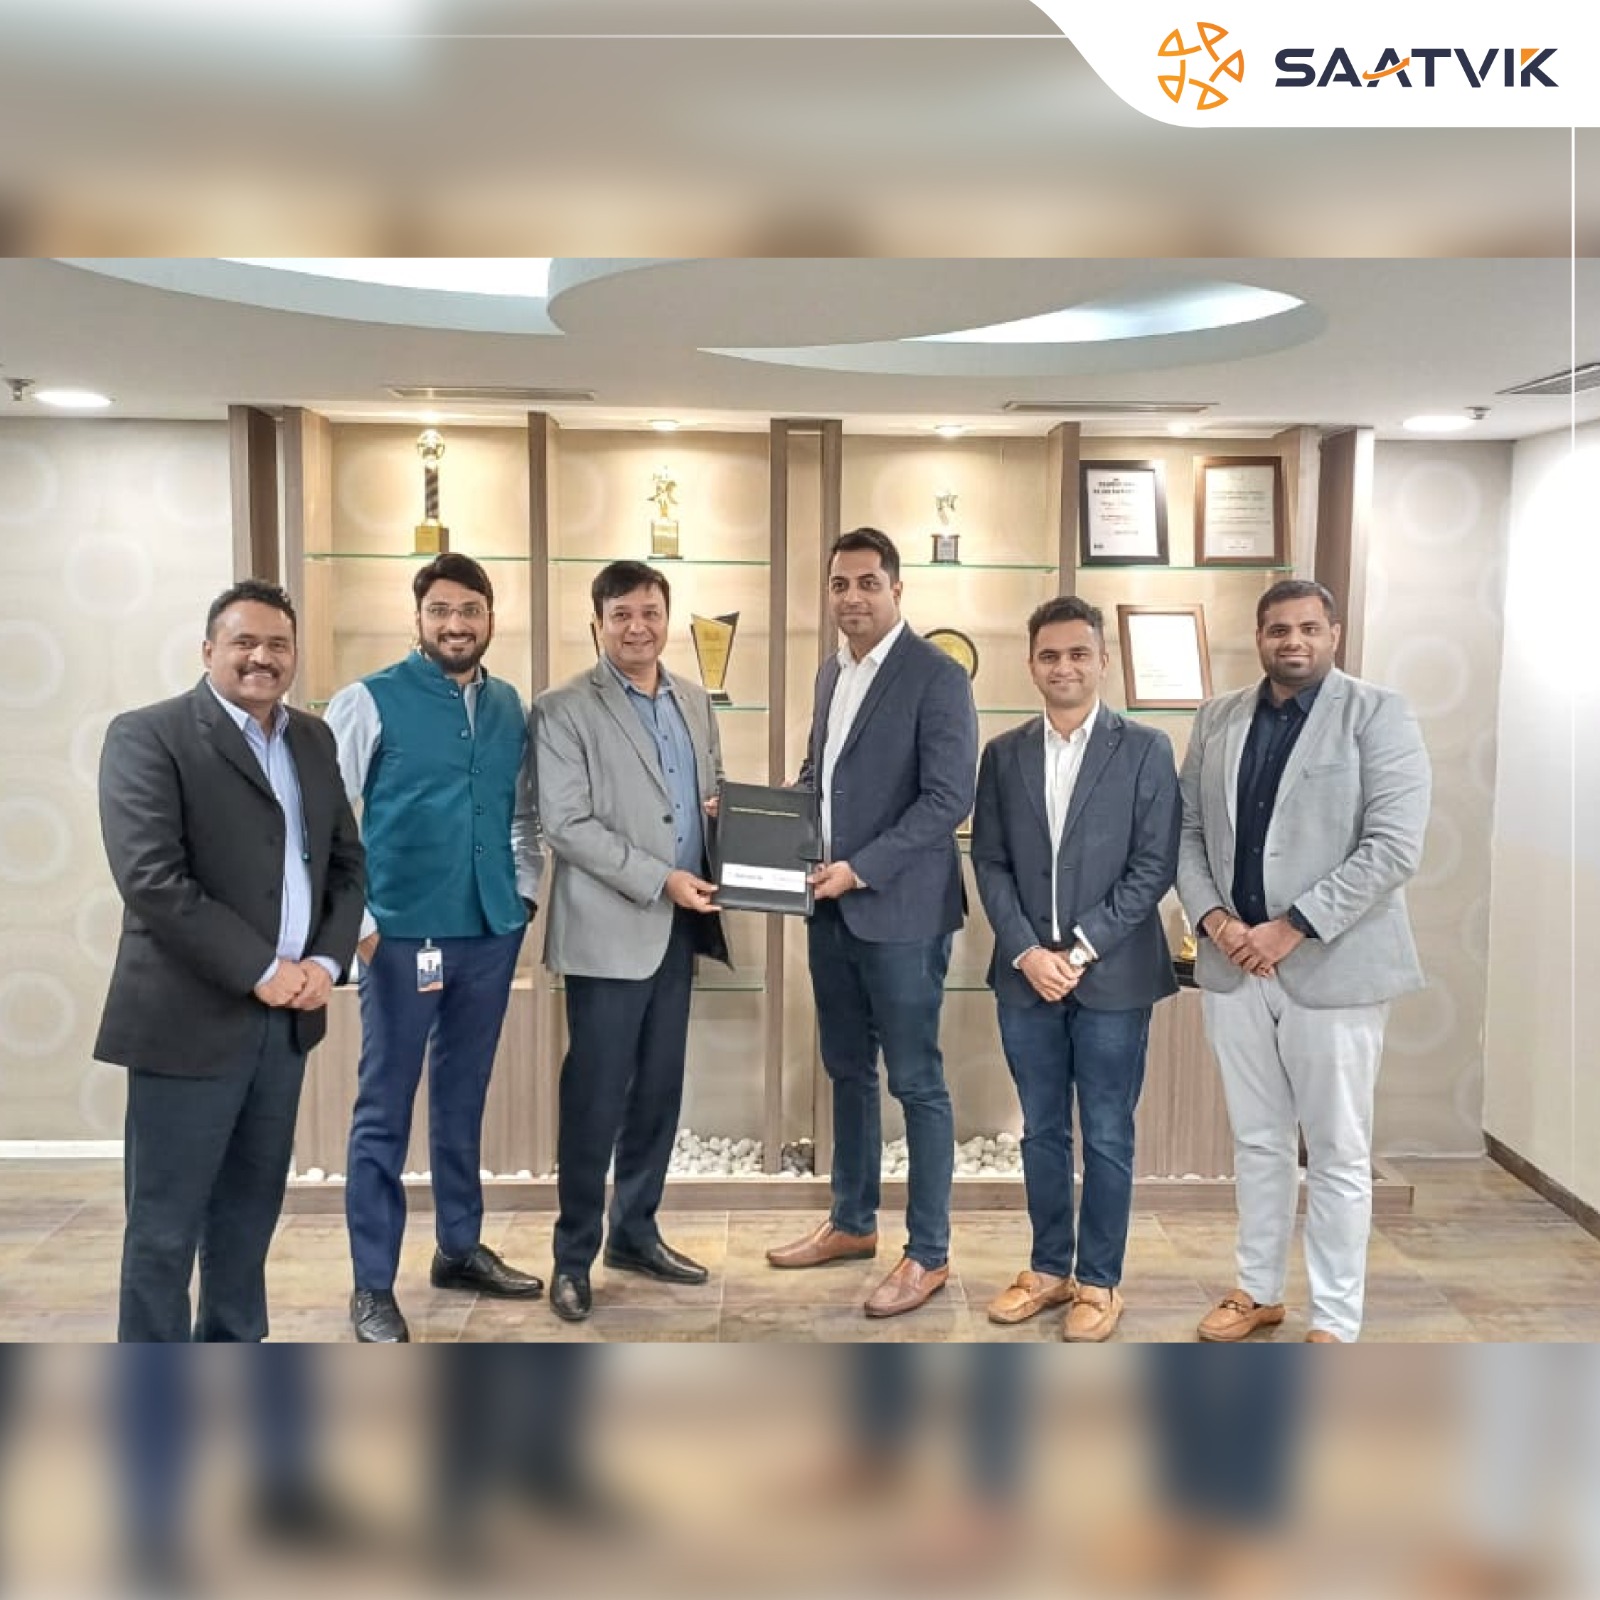 Saatvik Solar Appoints Celestial as their channel partner to market and sell Saatvik Modules across Maharashtra and Goa region – EQ